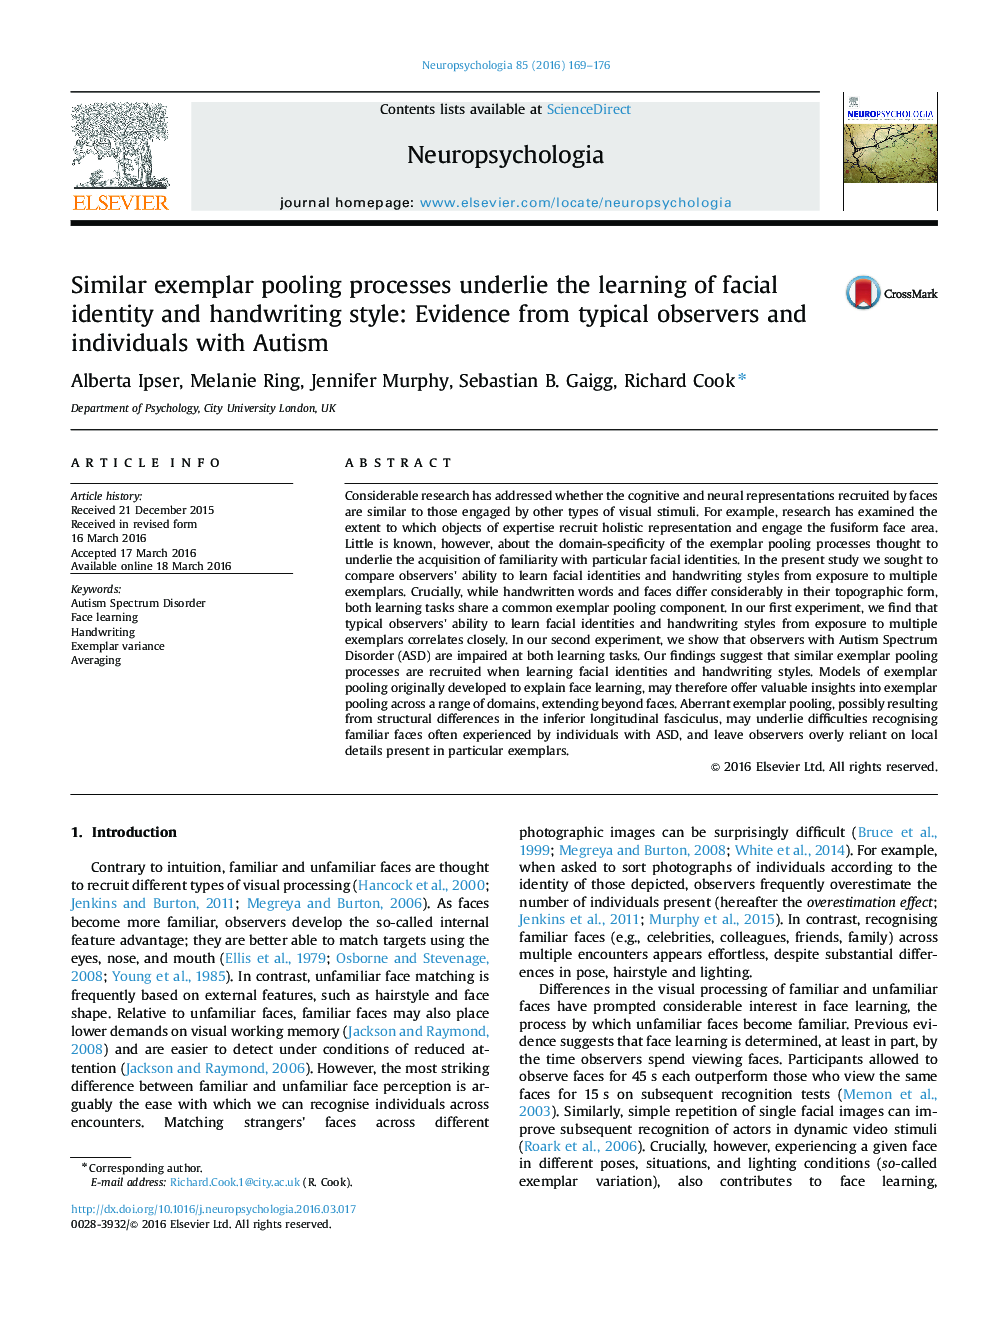 Similar exemplar pooling processes underlie the learning of facial identity and handwriting style: Evidence from typical observers and individuals with Autism